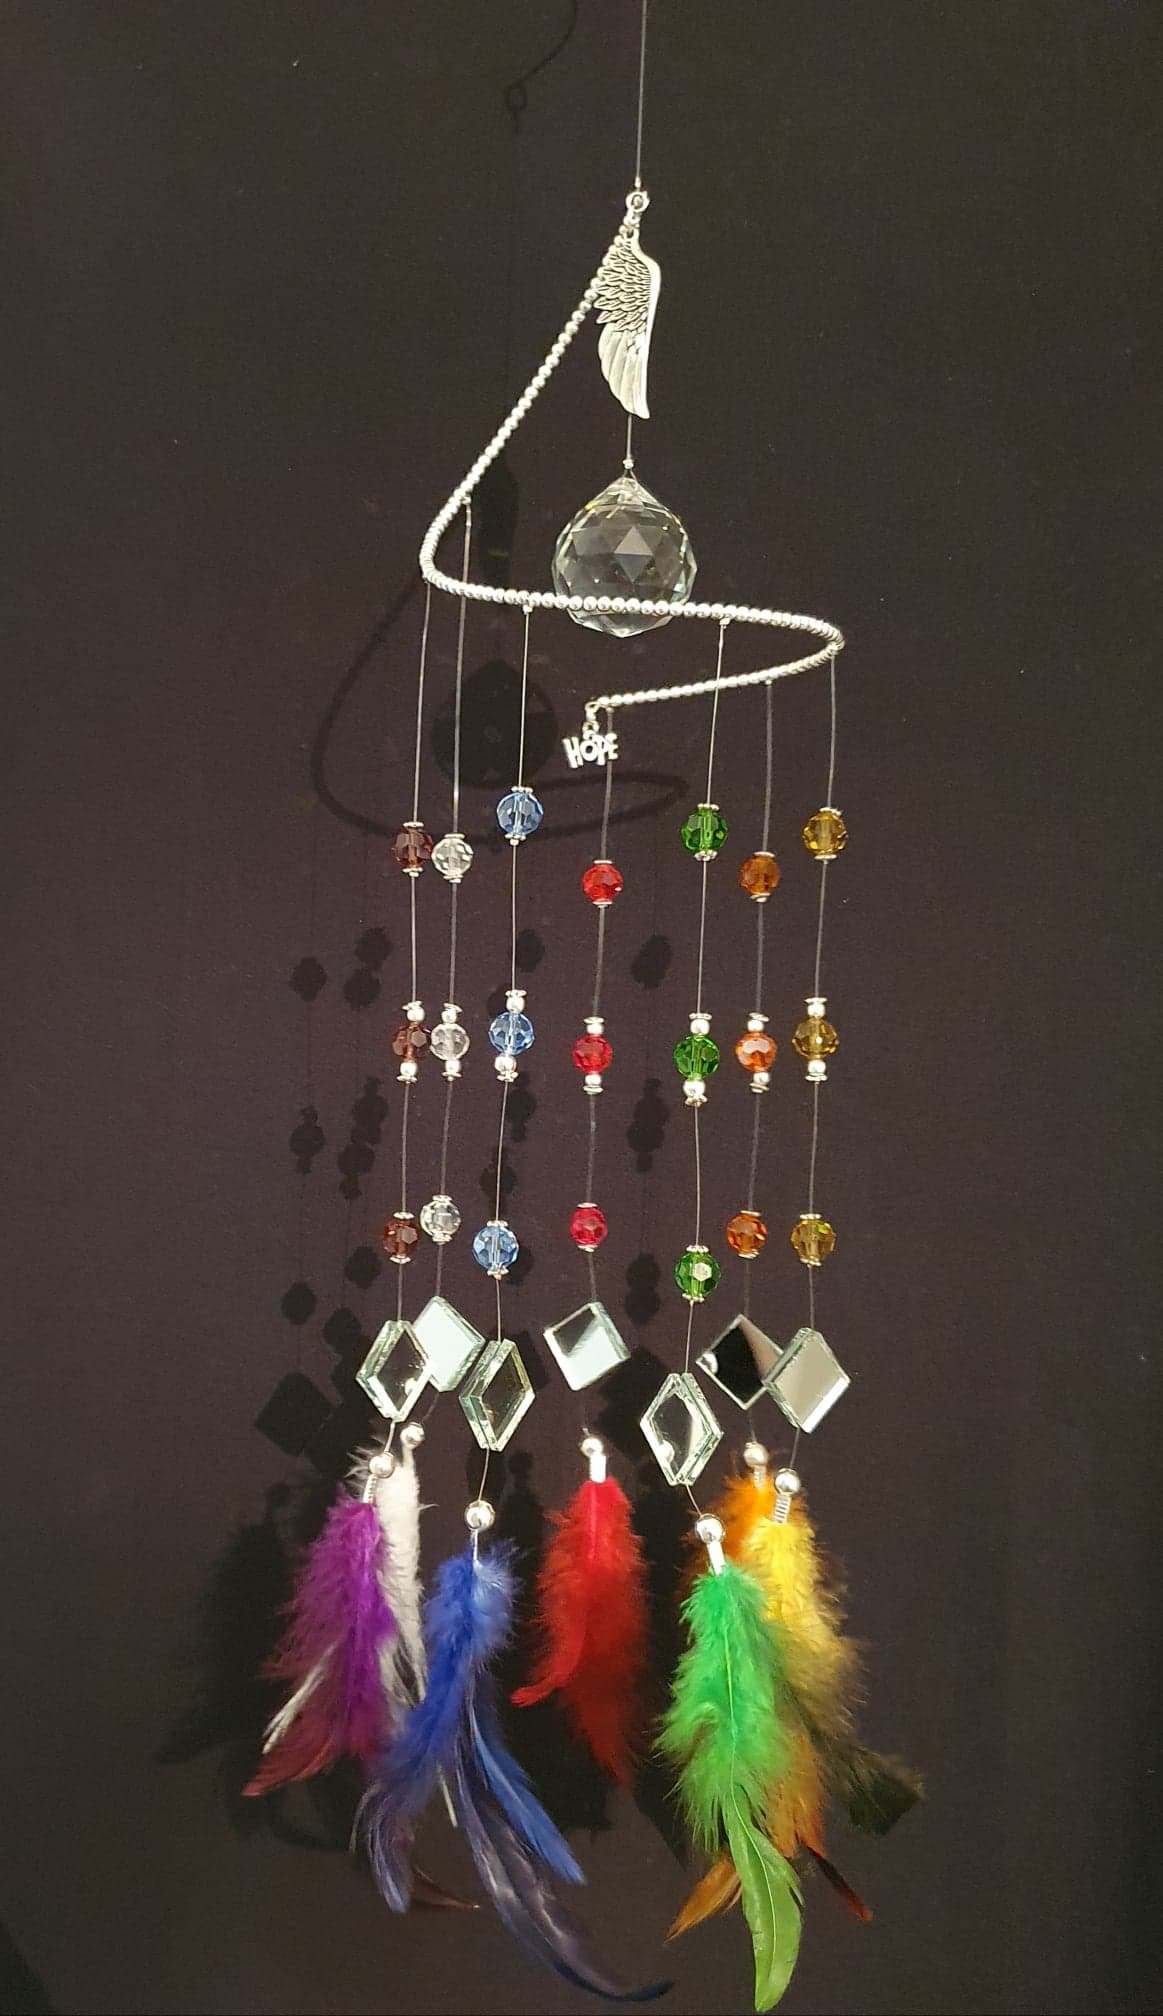 Rainbow suncatcher of "HOPE" with matching colour feathers. Large Angel wing.